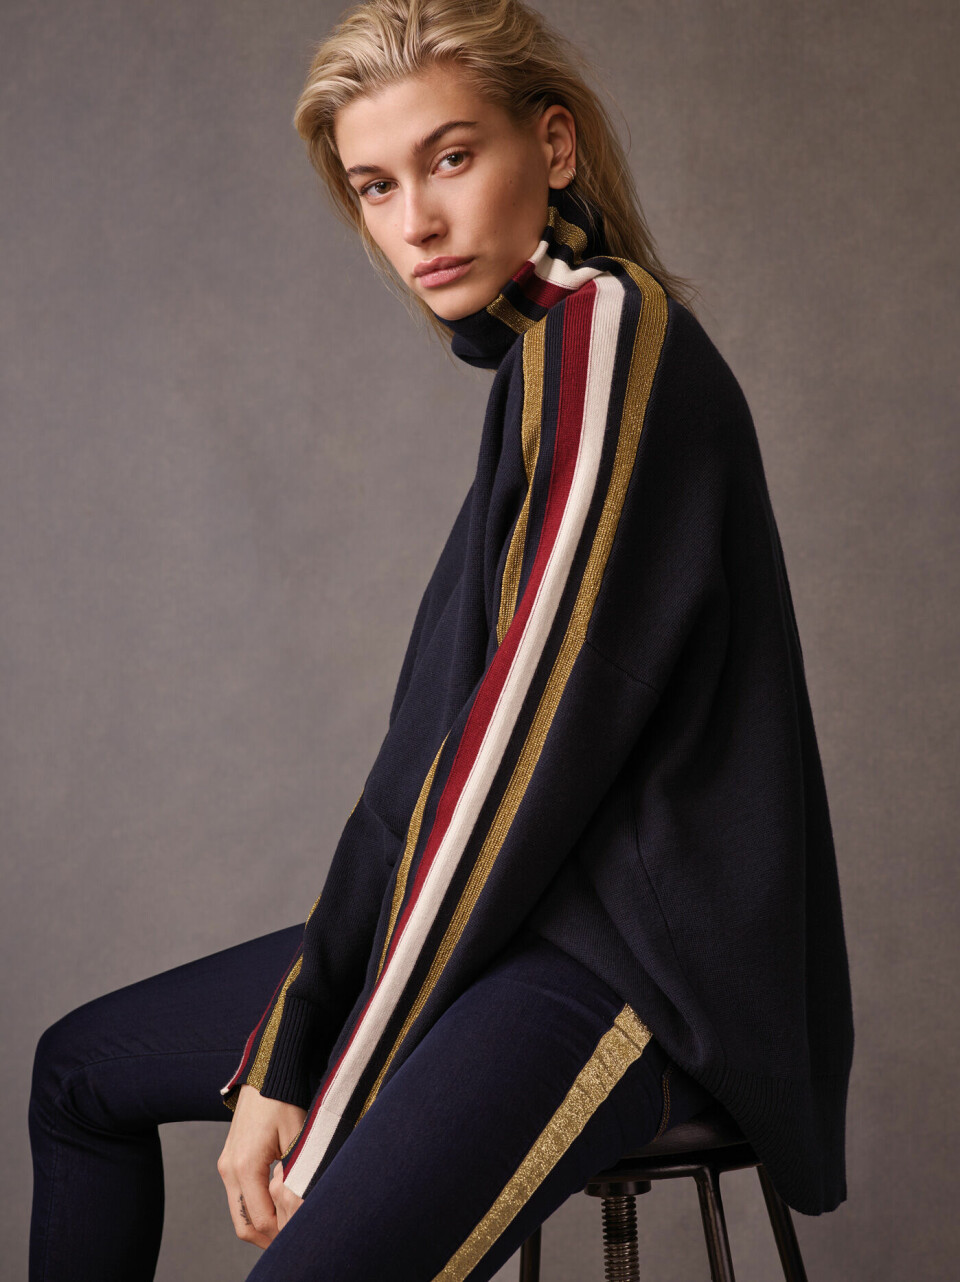 Tommy Hilfiger 'icon capsule collection' A/W 2018.